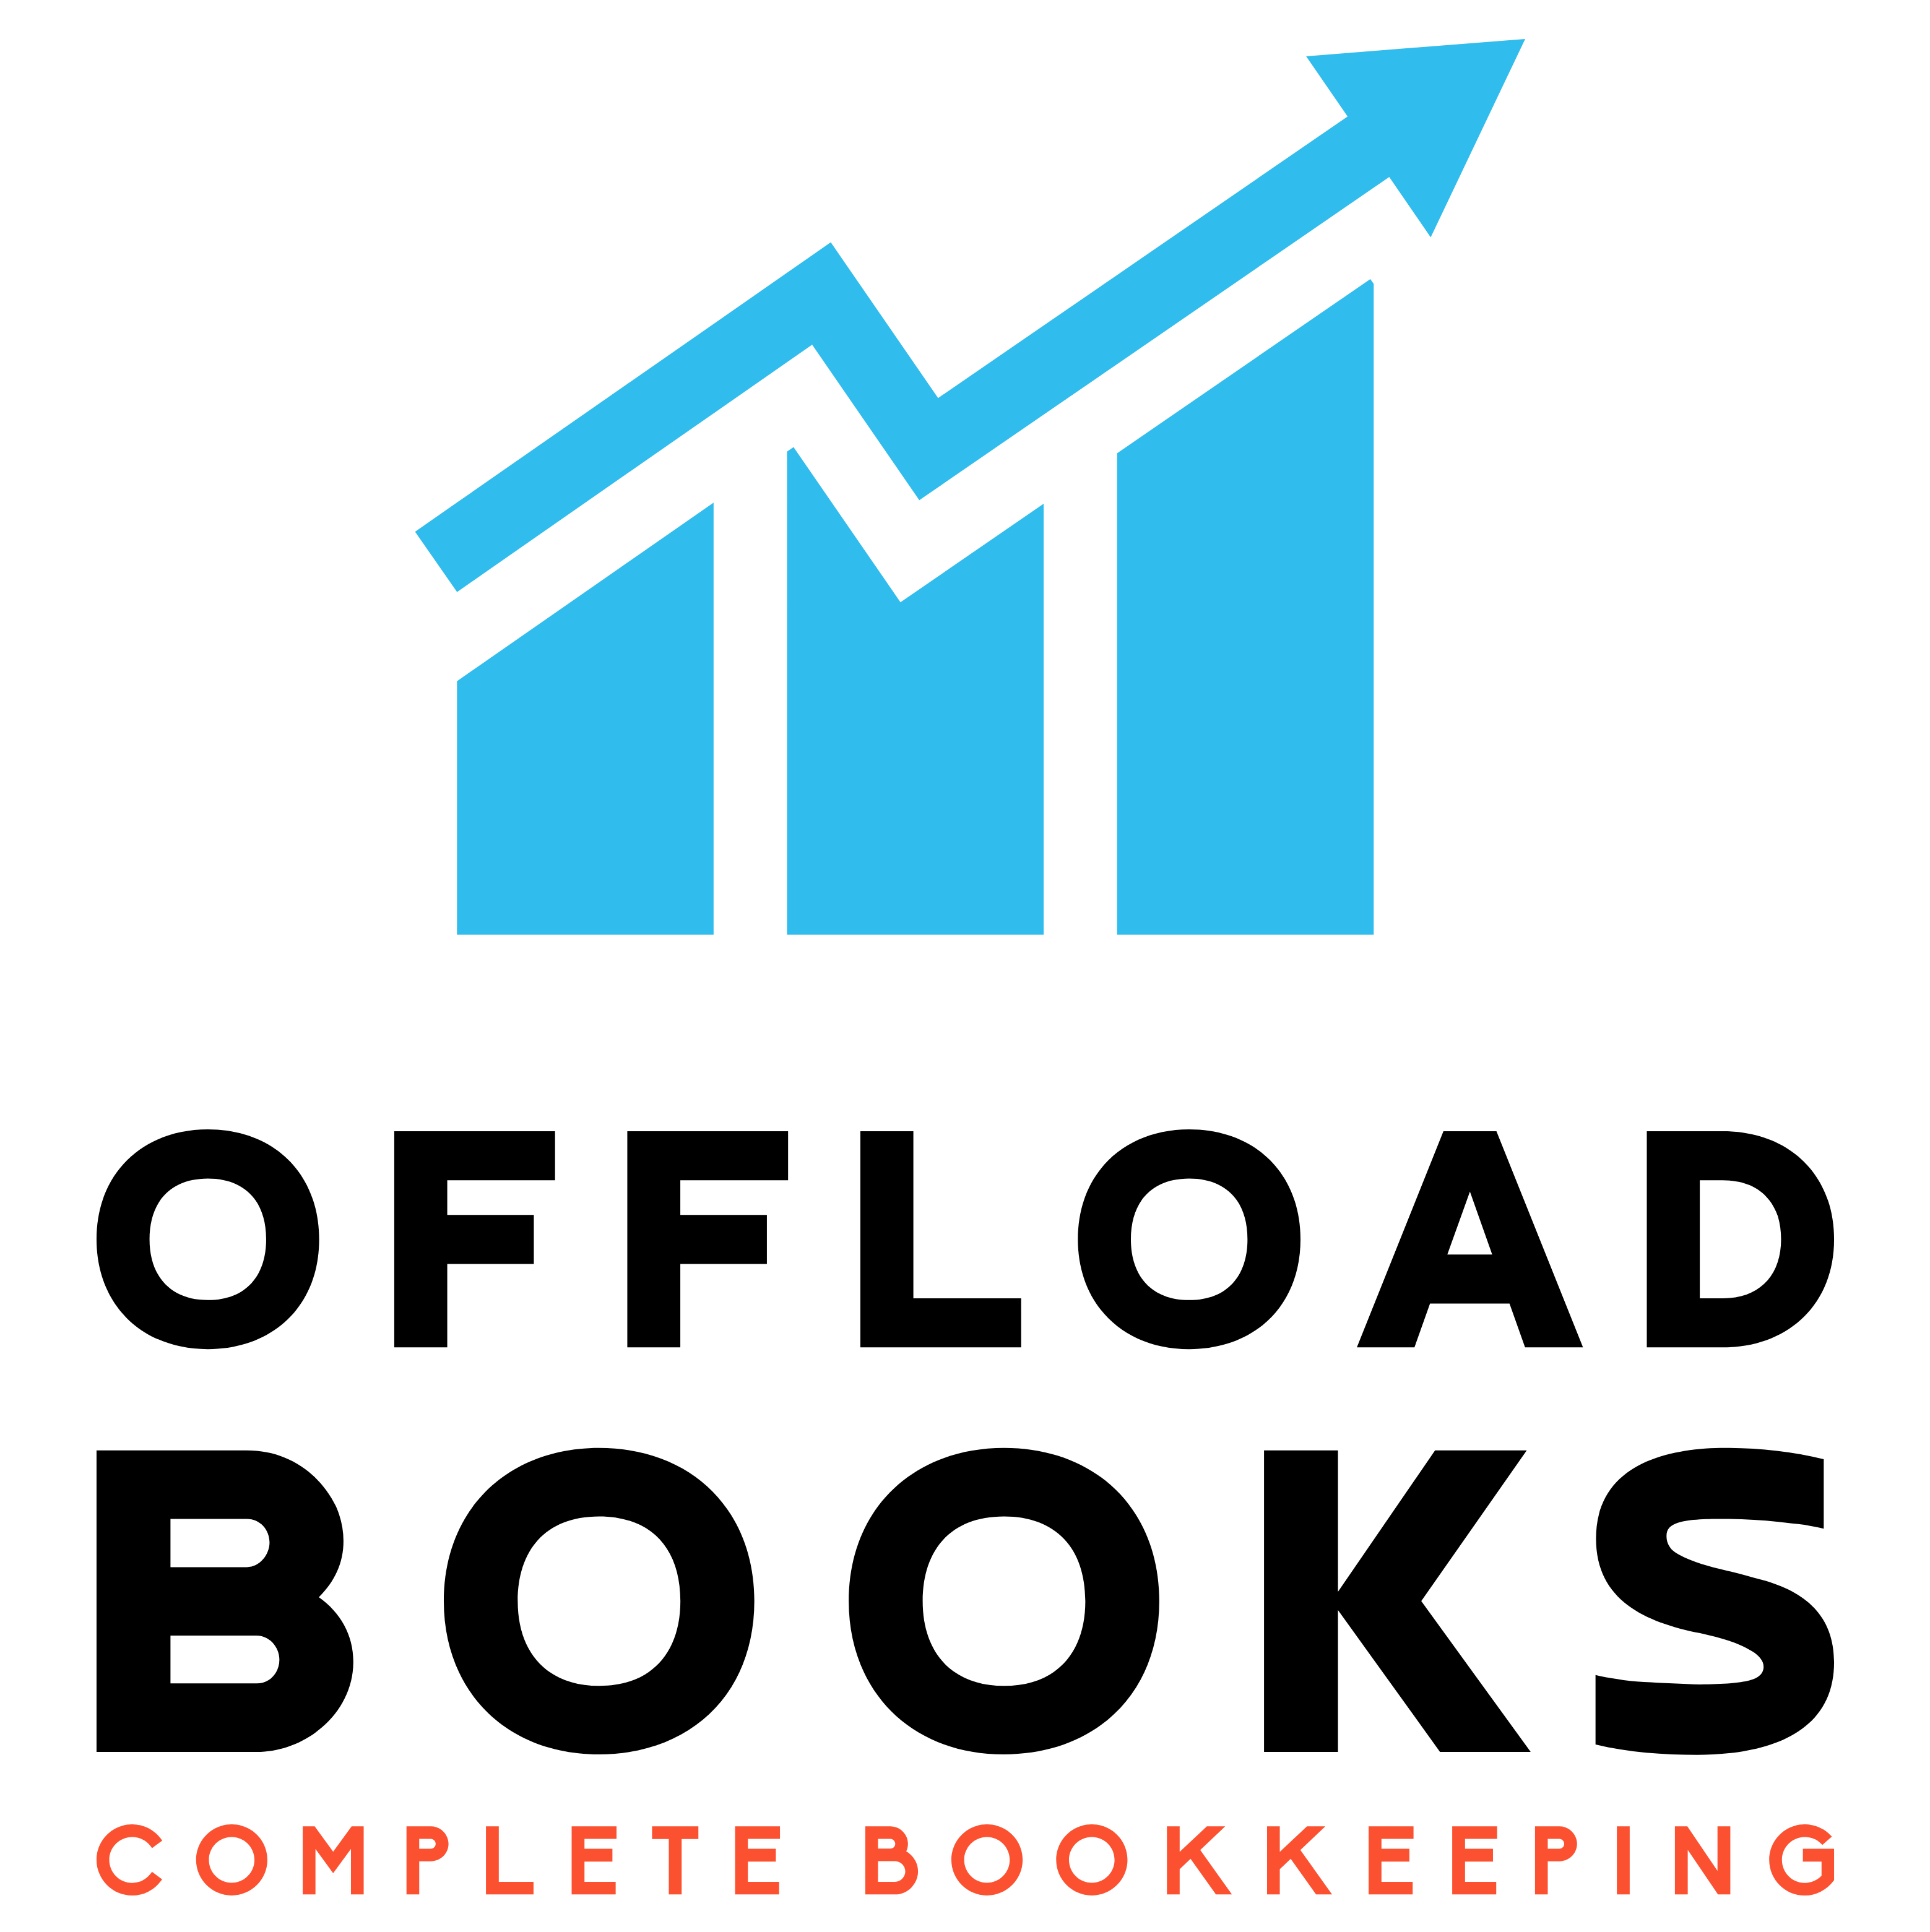 Offload Books – Complete Bookkeeping